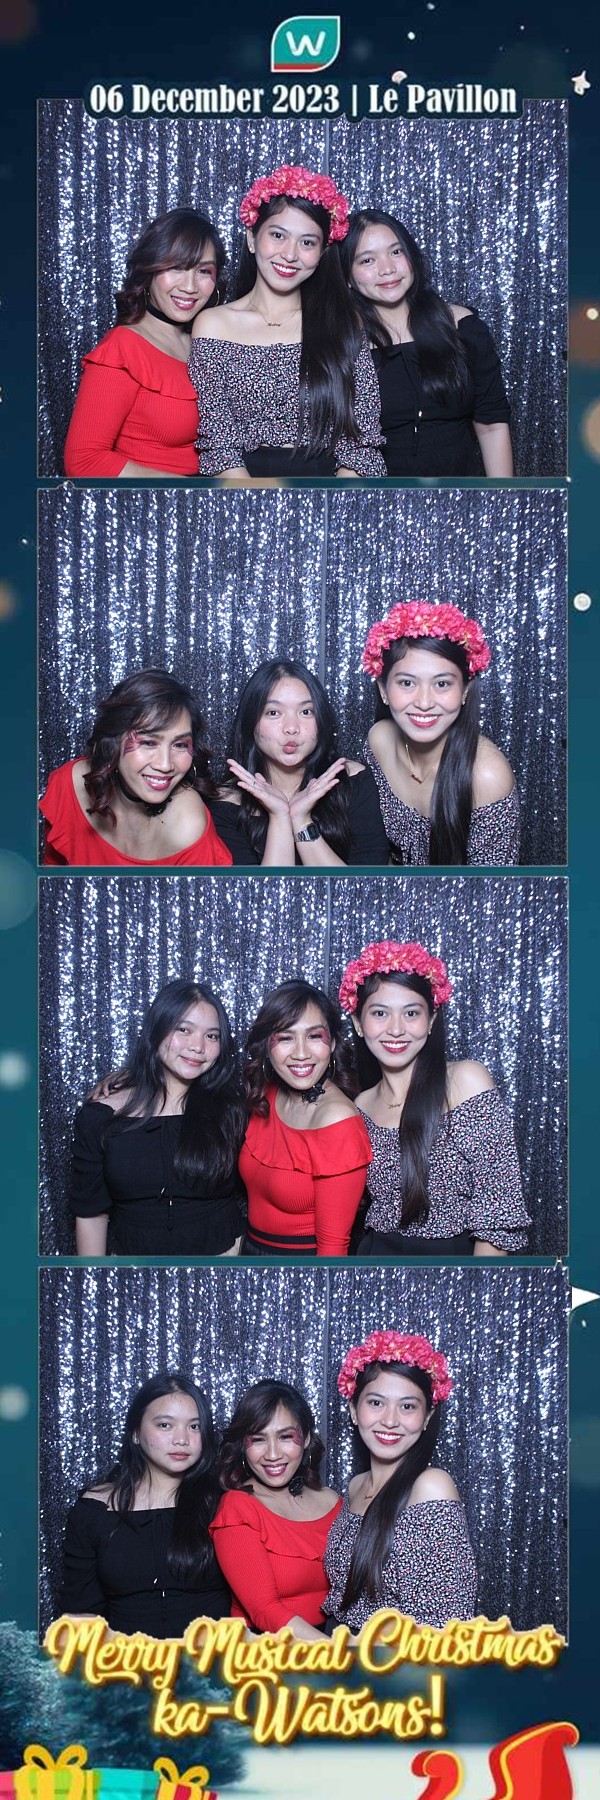 Watsons’ Christmas Party – Mirror Booth